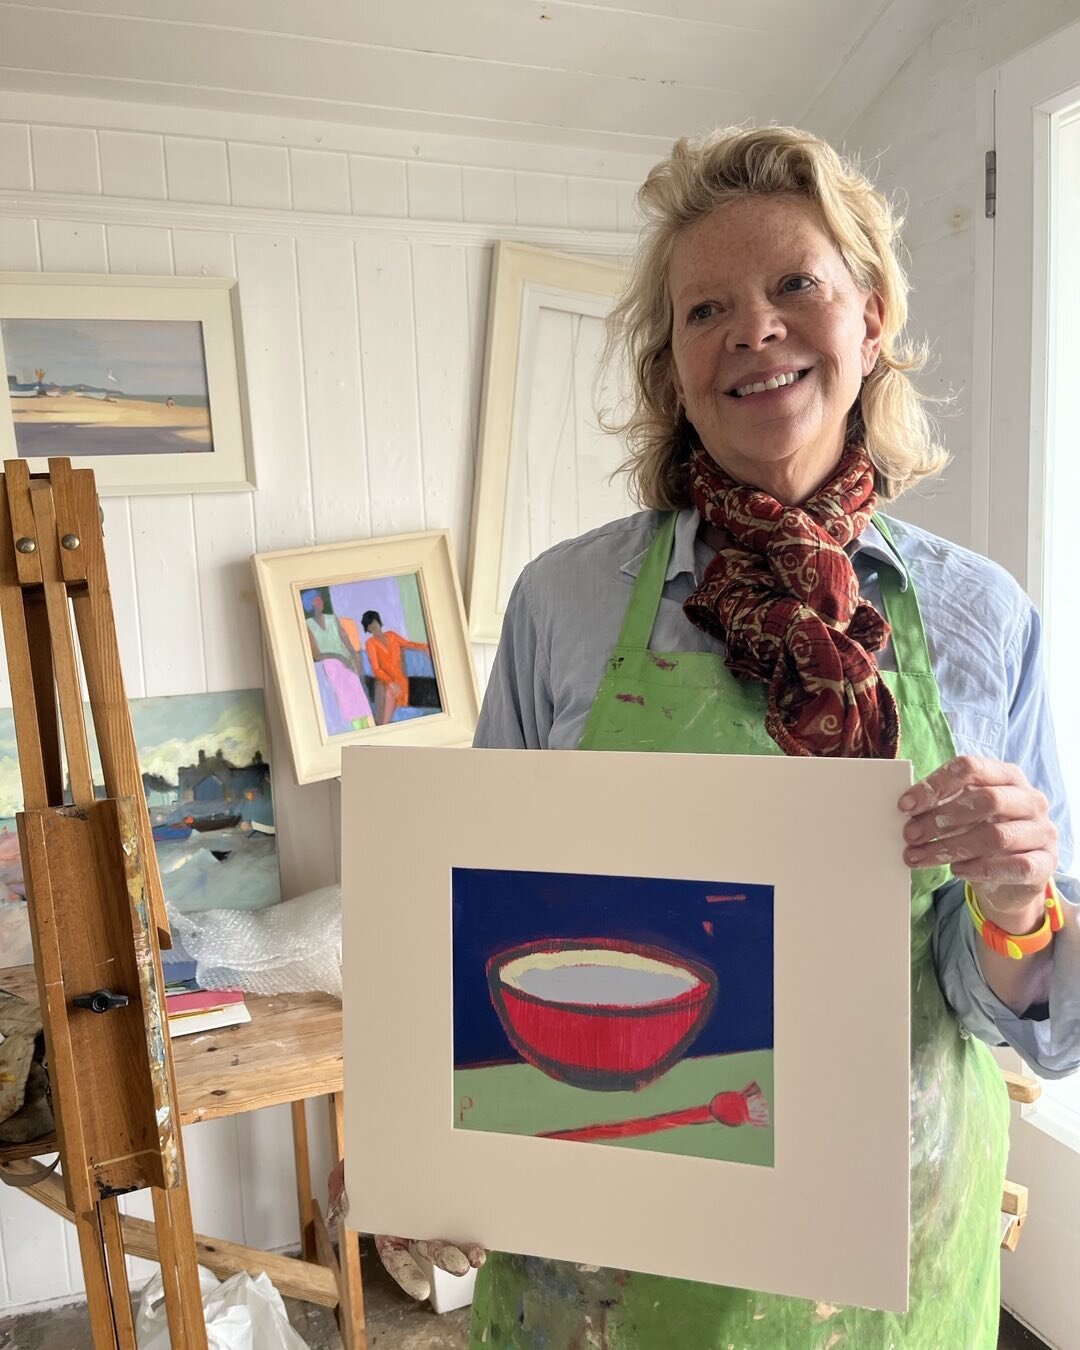 Sarah Muir Poland at the Aldeburgh Beach Lookout holding her painting for Lookout Cookout and preparing for her recipe tasting tomorrow morning 9.30- 11.30 am, all welcome!  @sarahmuirpoland @david.baldry #art #aldeburgh